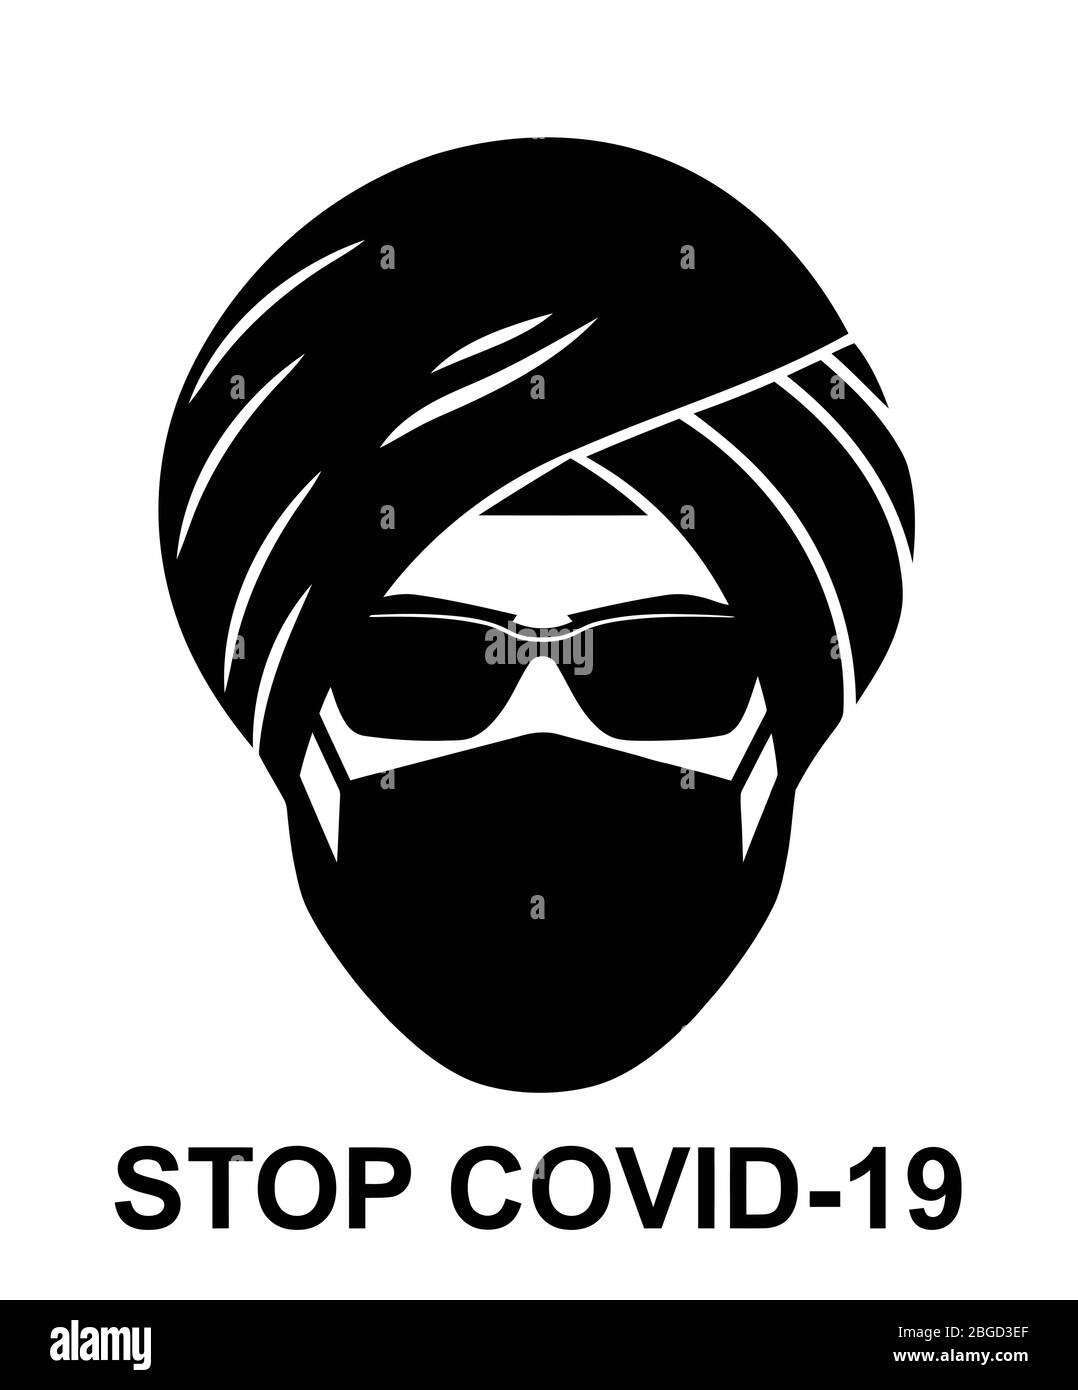 Stay Home, stop the coronavirus Covid-19. Warning against the spread of the pandemic. sign Sikh man in a medical mask on a white background, vector Stock Vector